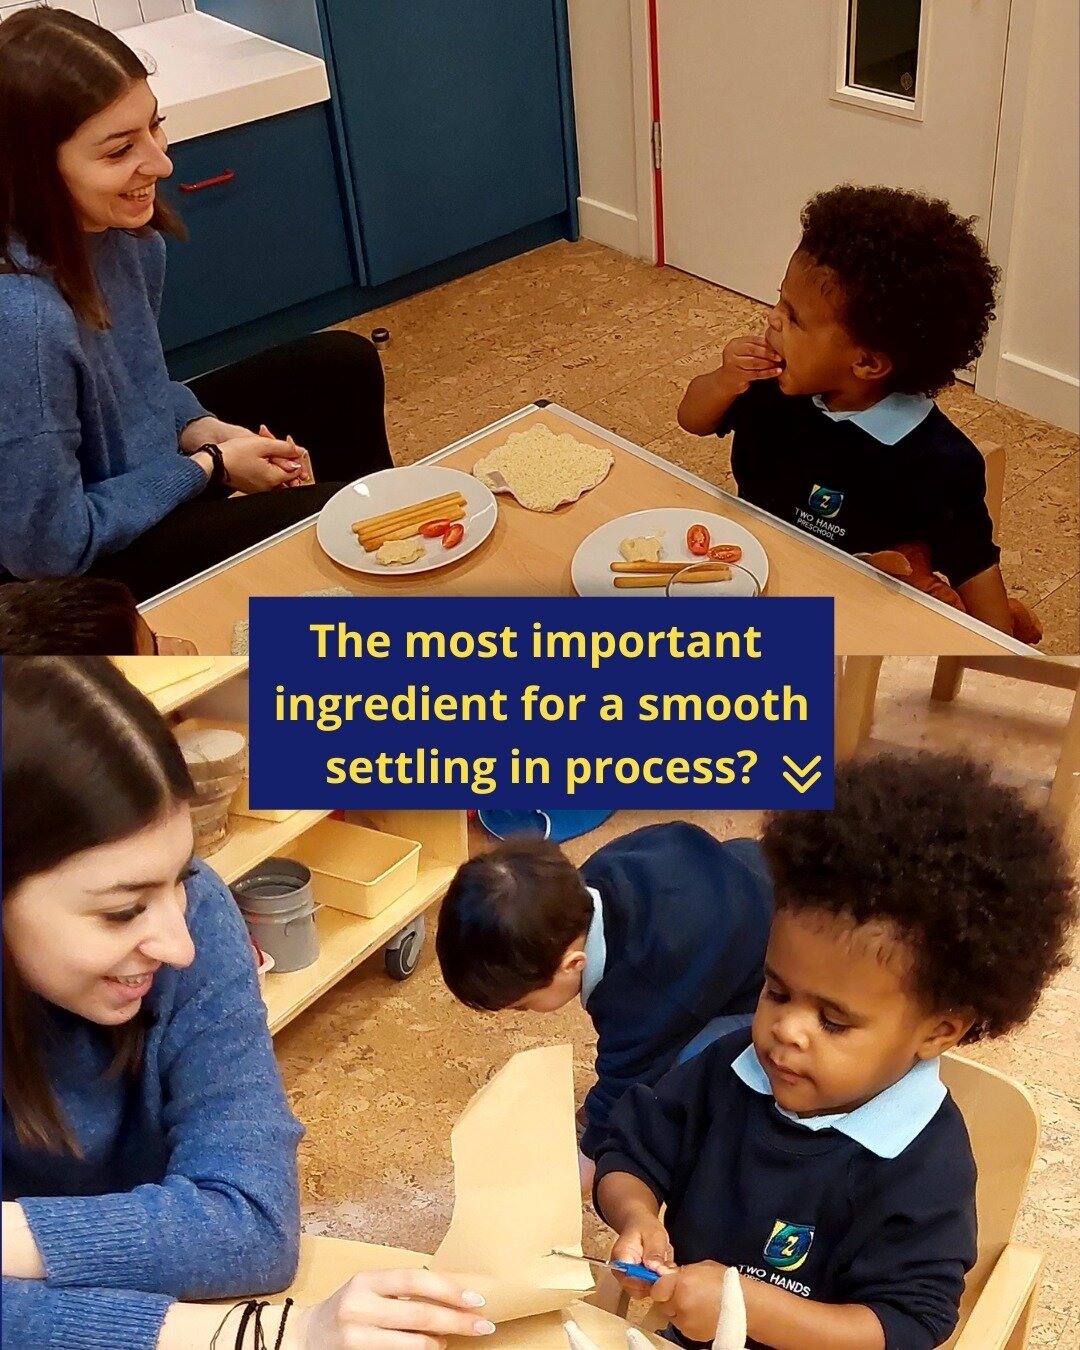 The child getting a sense that their key person is a warm, responsive and loving person.

And to make that happen, we think it requires:

- having a staff body of warm, responsive teachers who love working with children so much that the children them